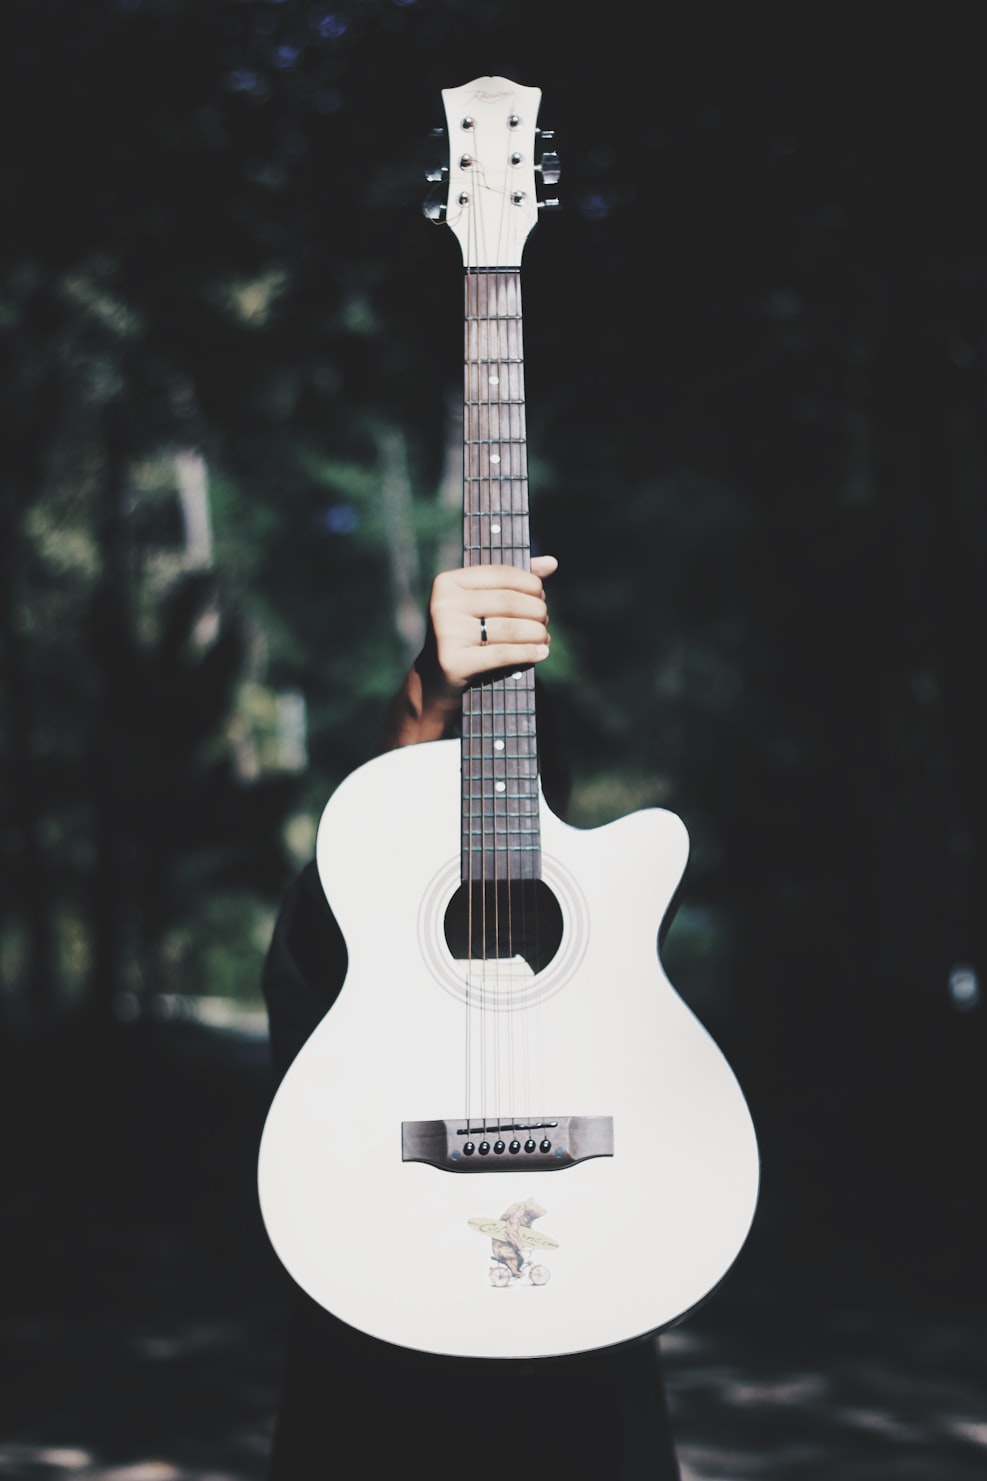 A person holding a white guitar